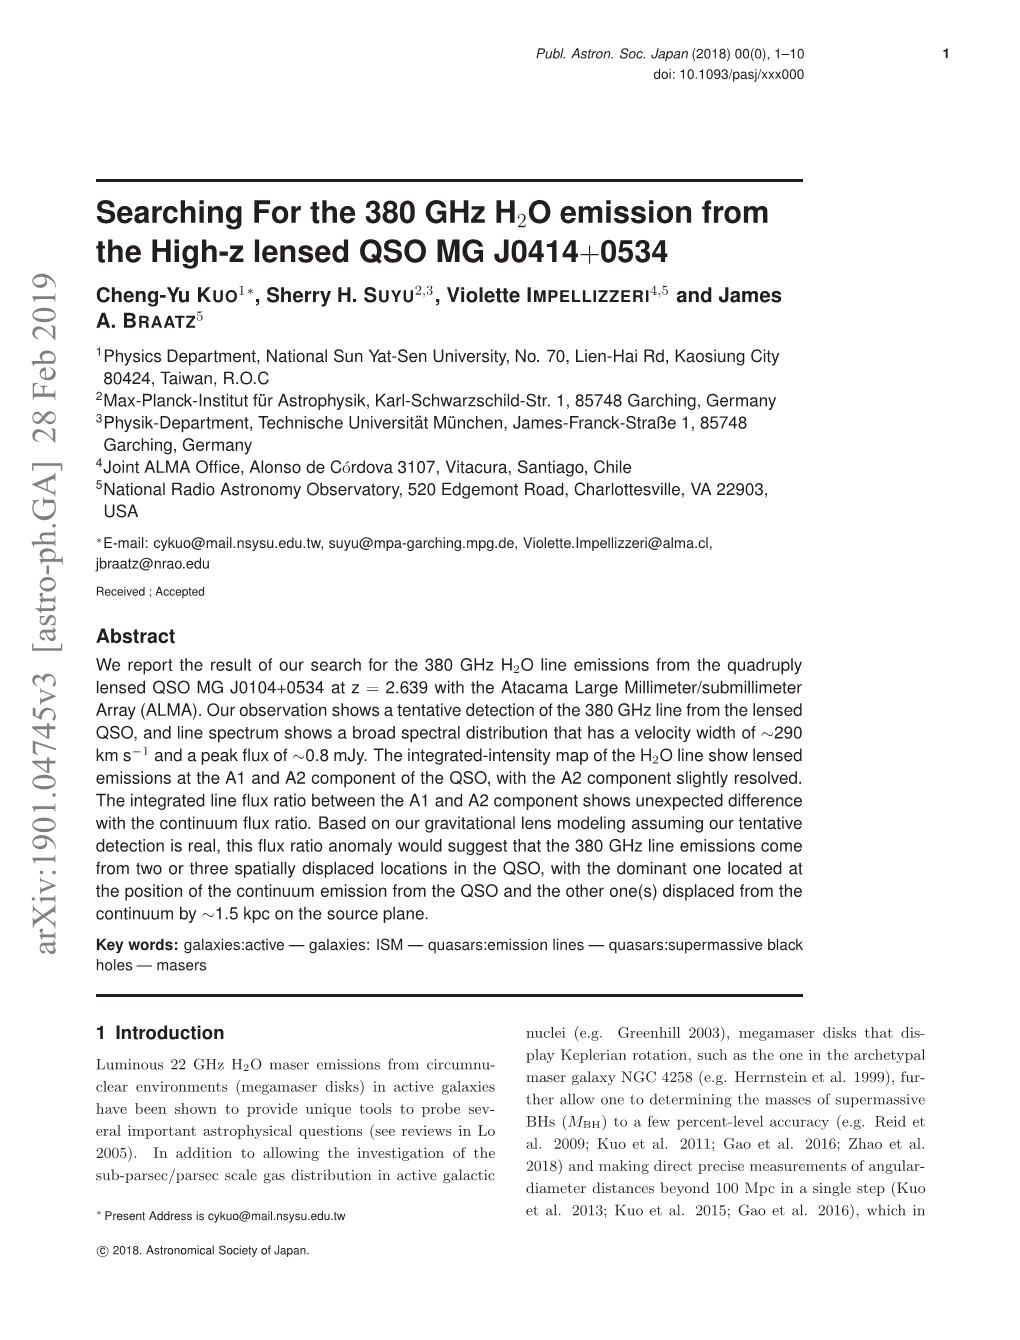 Searching for the 380 Ghz H2 O Emission from the High-Z Lensed